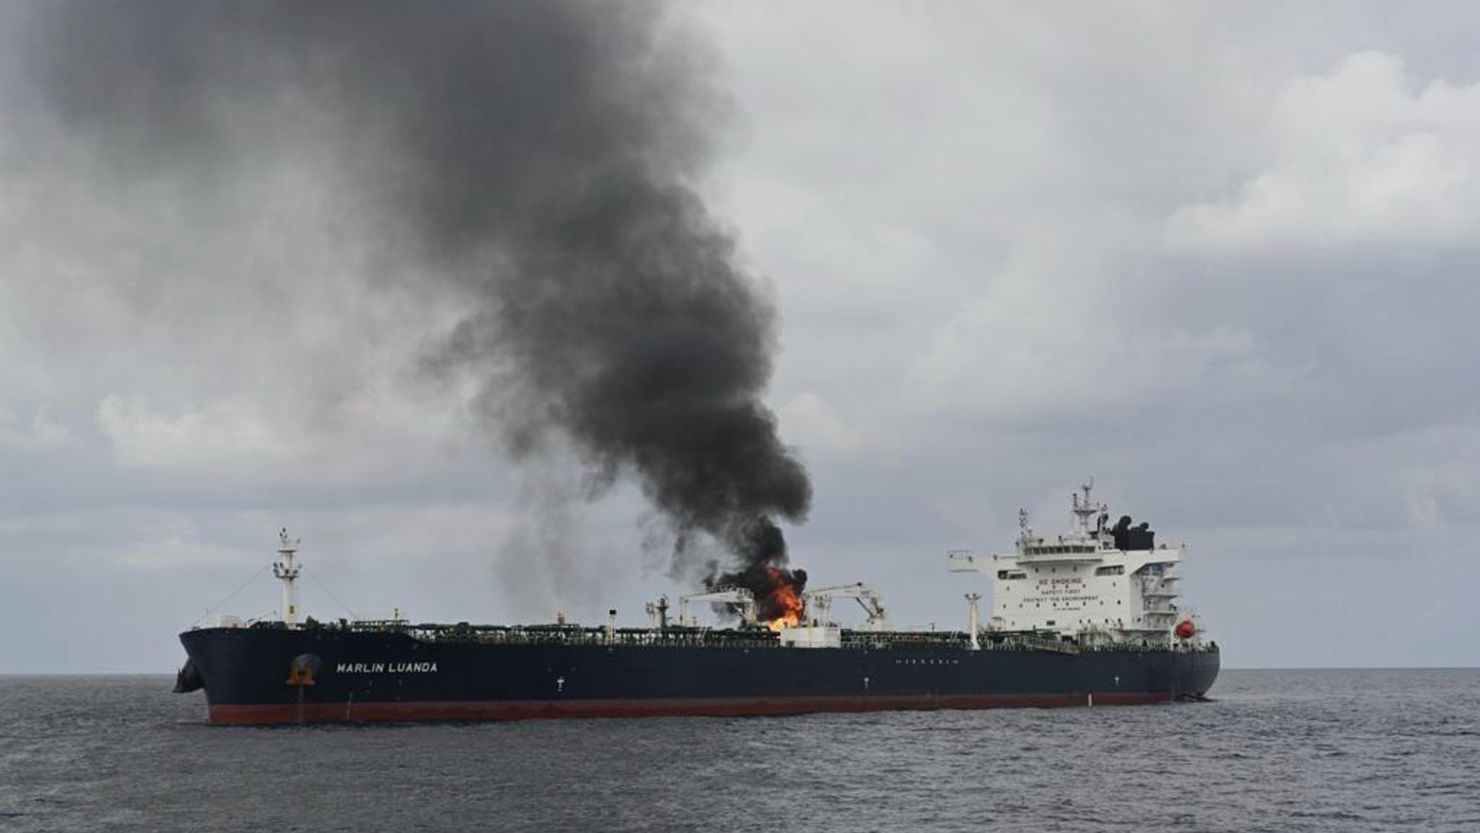 The oil tanker Marlin Luanda catches fire after an attack in the Gulf of Aden, the waterway leading into the Red Sea, on January 27, 2024.